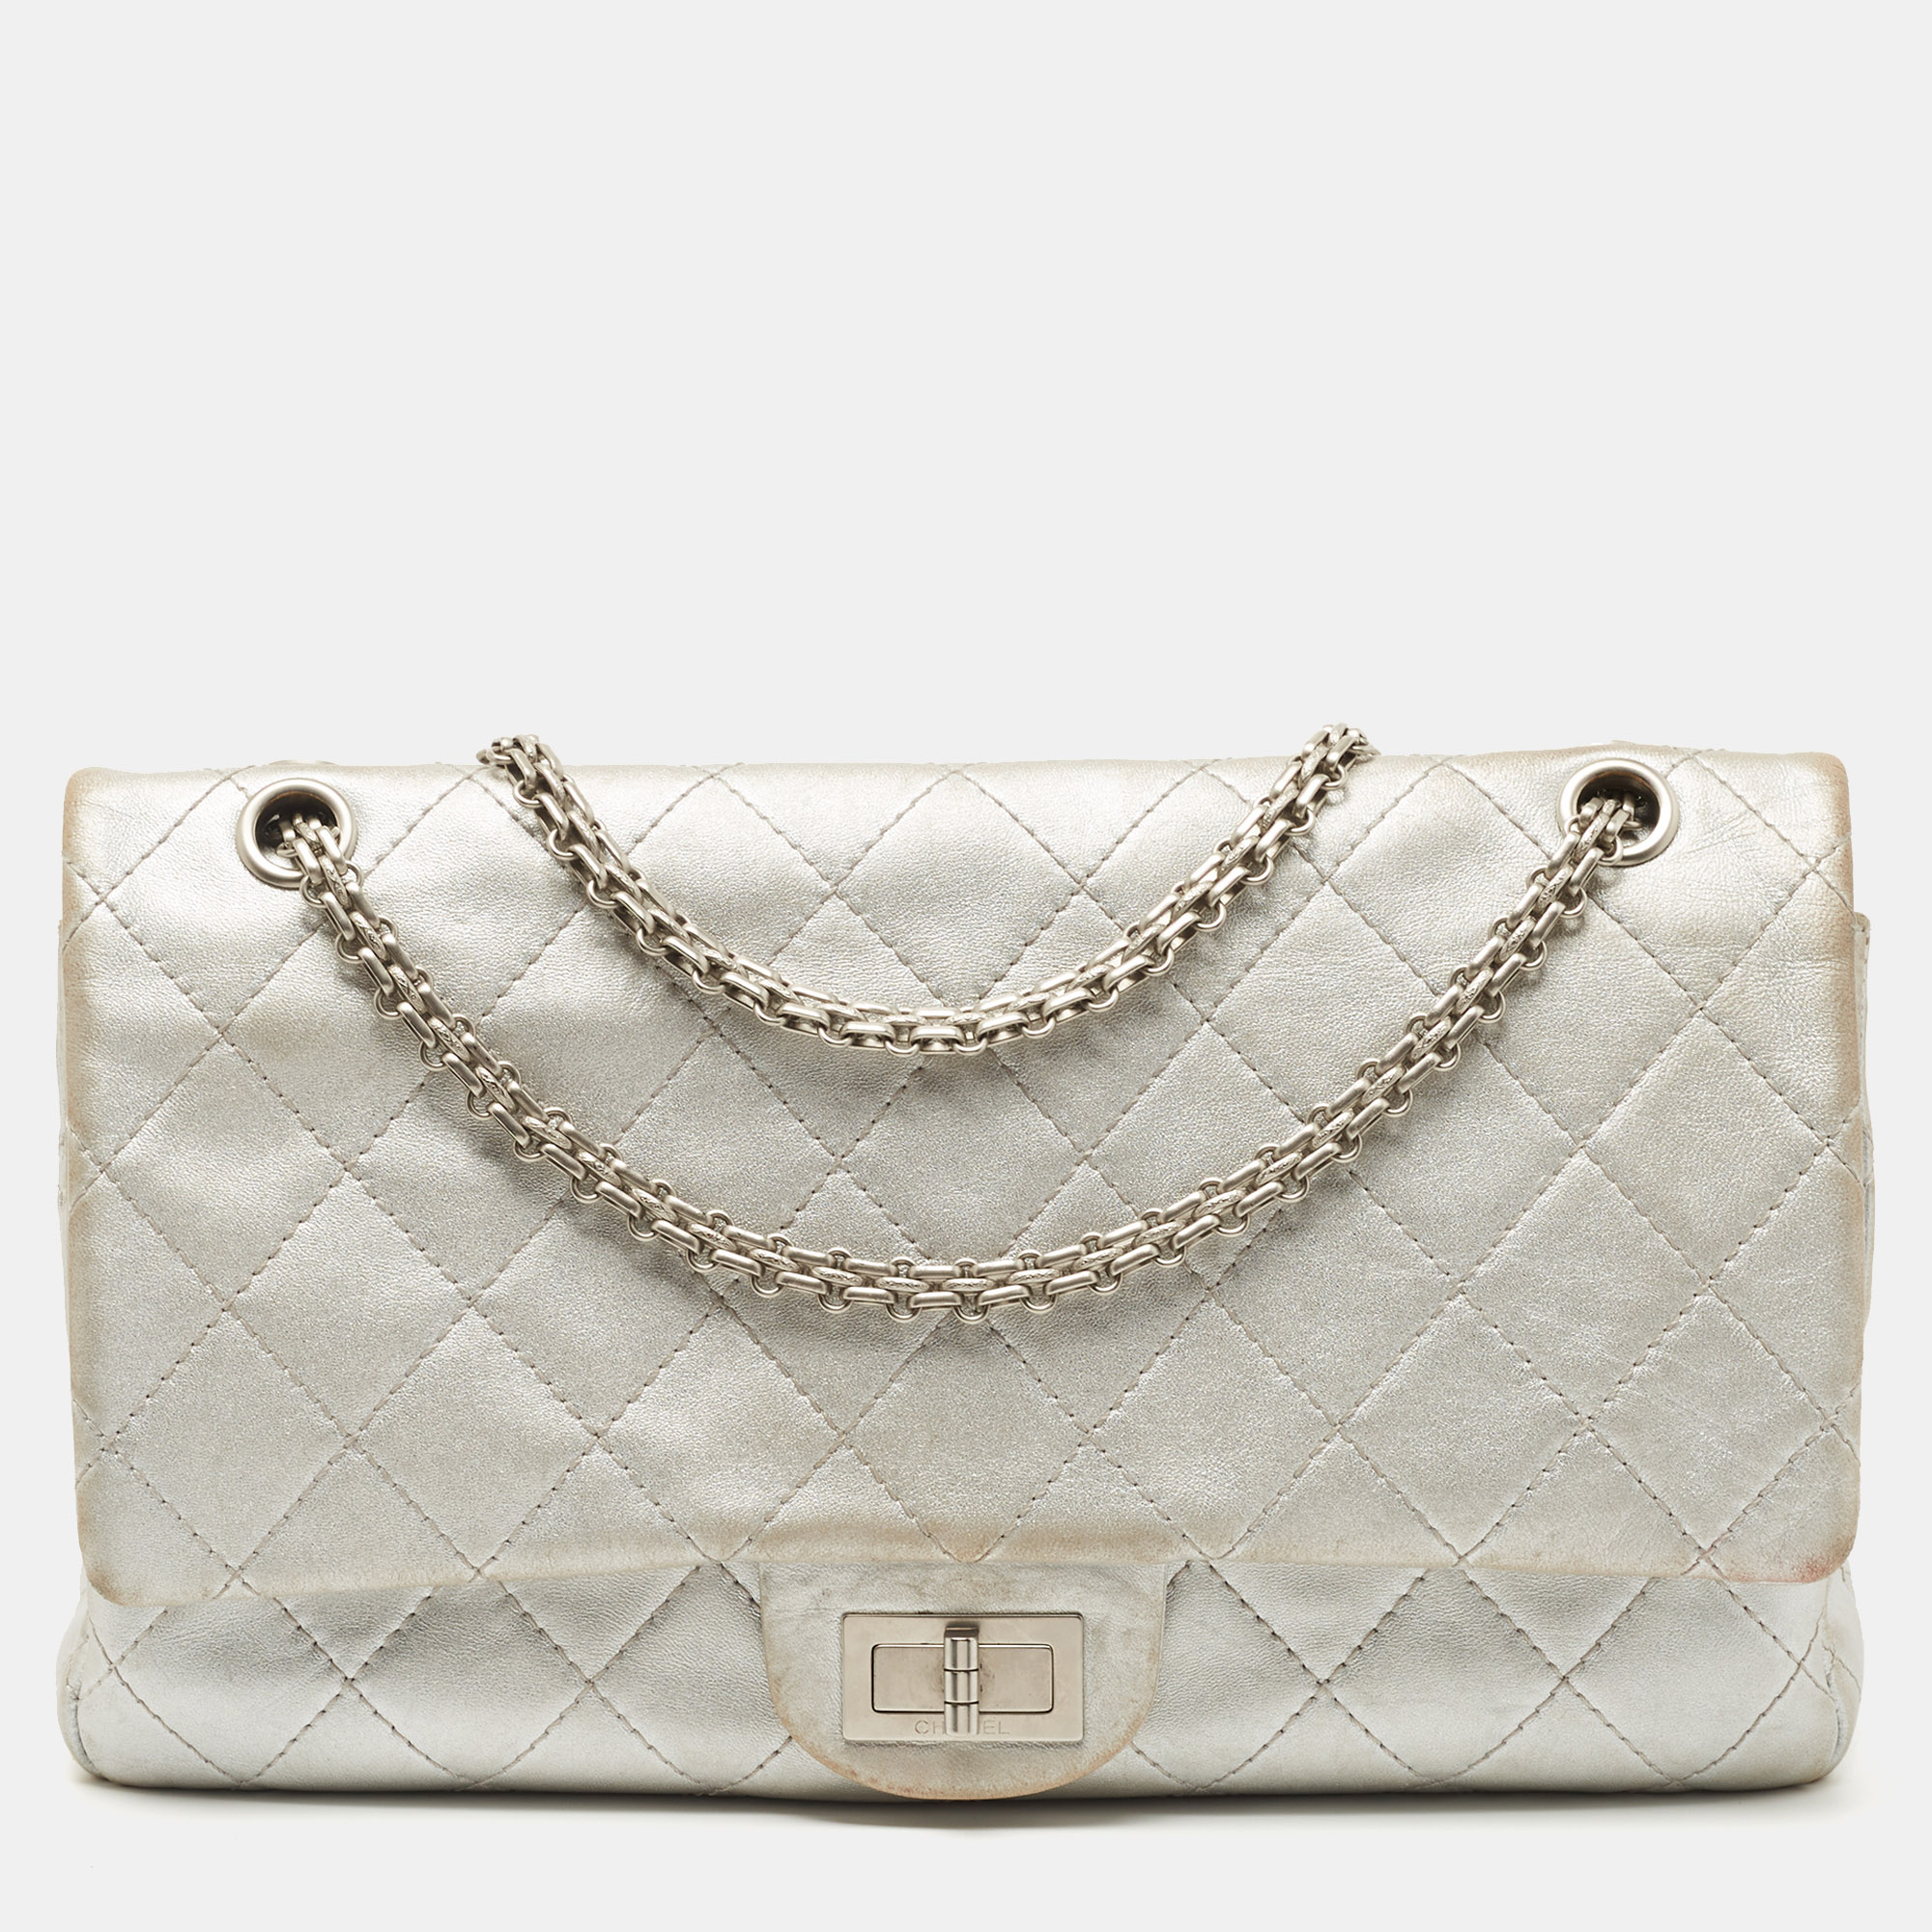 Pre-owned Chanel Silver Quilted Leather Reissue 2.55 Classic 227 Flap Bag